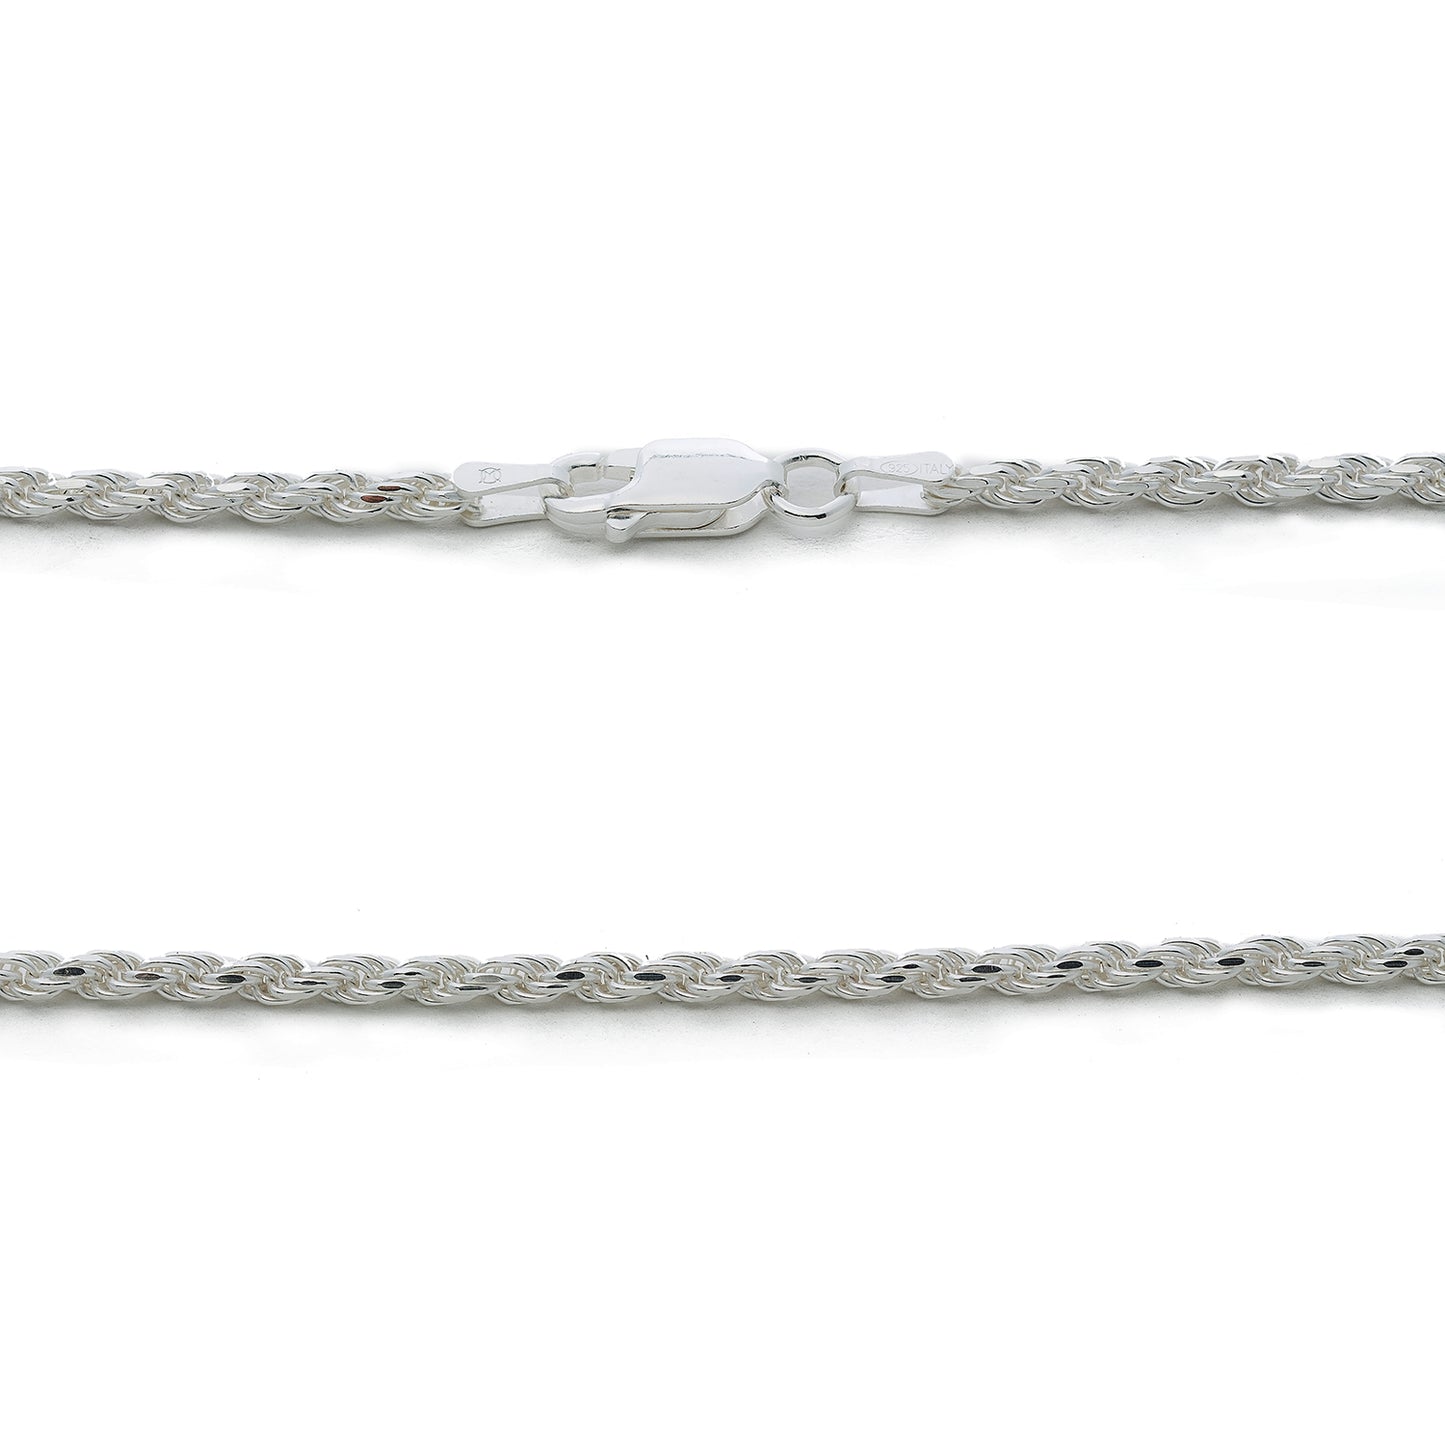 925 Sterling Silver 2.5MM Rope Chain Italian Crafted Necklace for Women and Men 16 - 36"